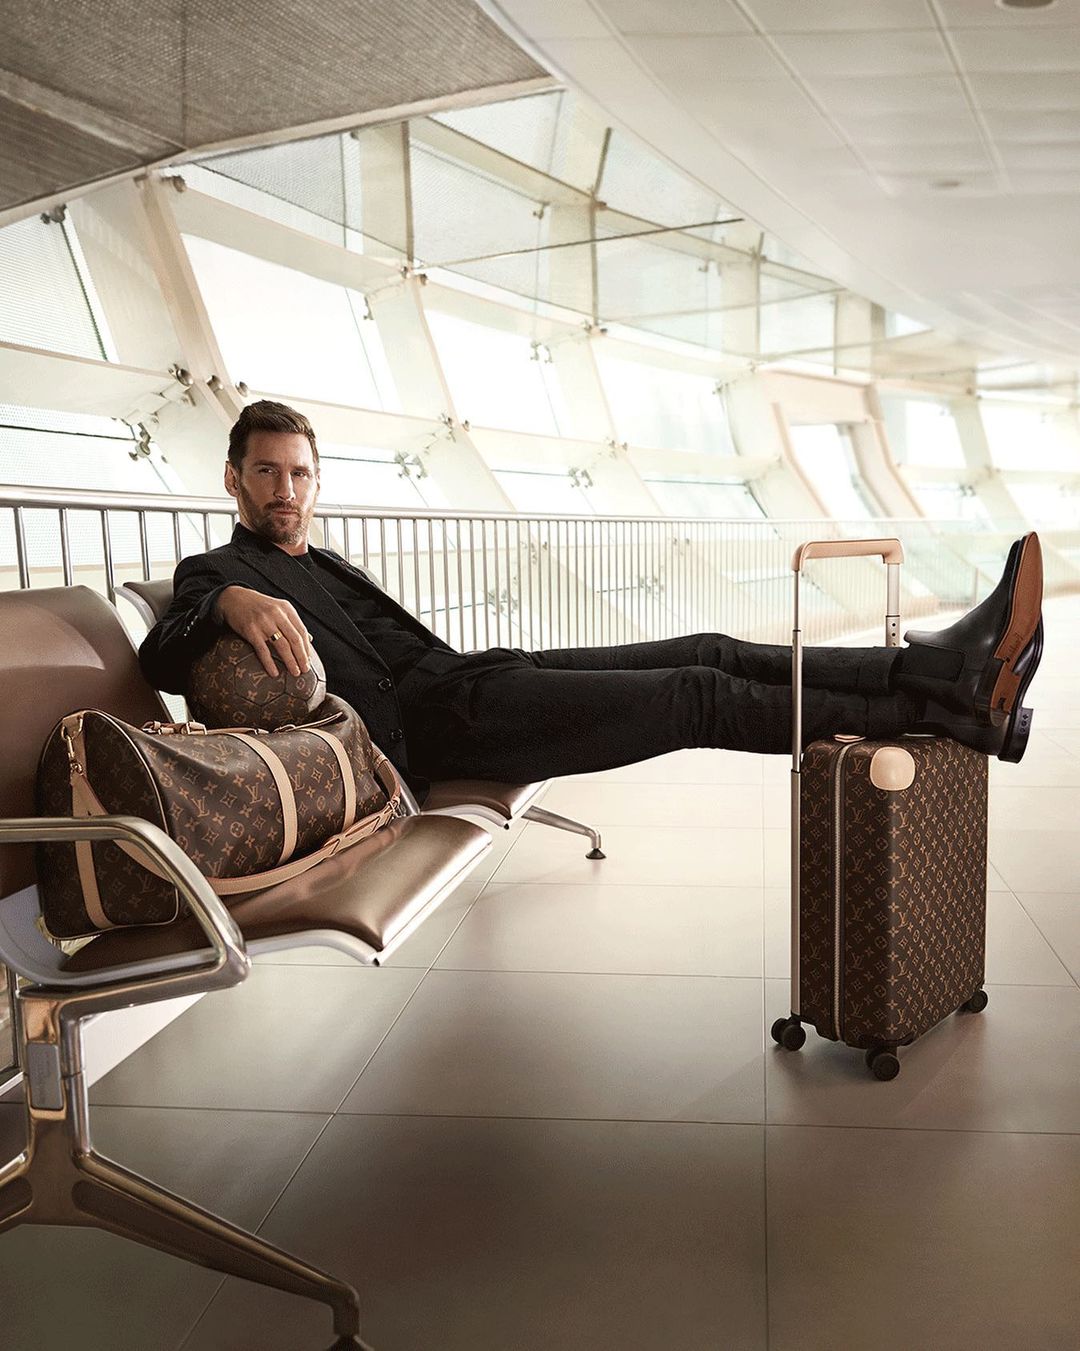 Louis Vuitton: Horizons Never End starring Lionel Messi